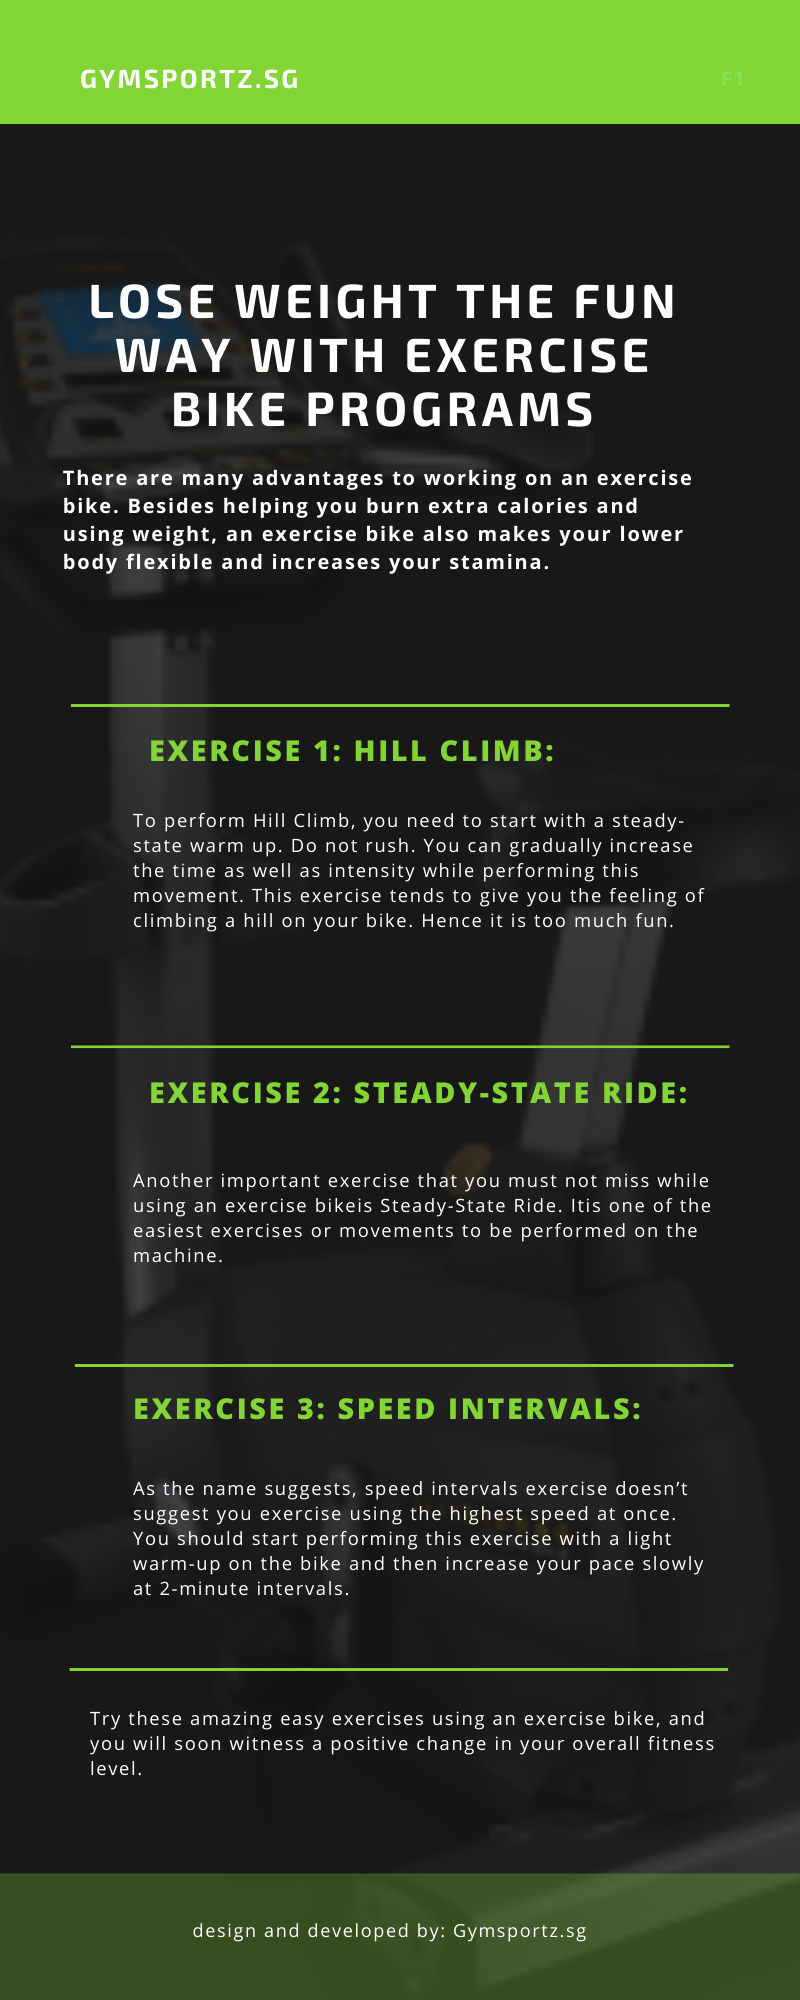 Lose Weight The Fun Way With Exercise Bike Programs One of the essential machines you need in your home gym to lose weight is an exercise bike. An exercise bike or a stationary bike is popular gym equipment. https://gymsportz.sg/cardio-equipment/exercise-bike/ by Gymsportz